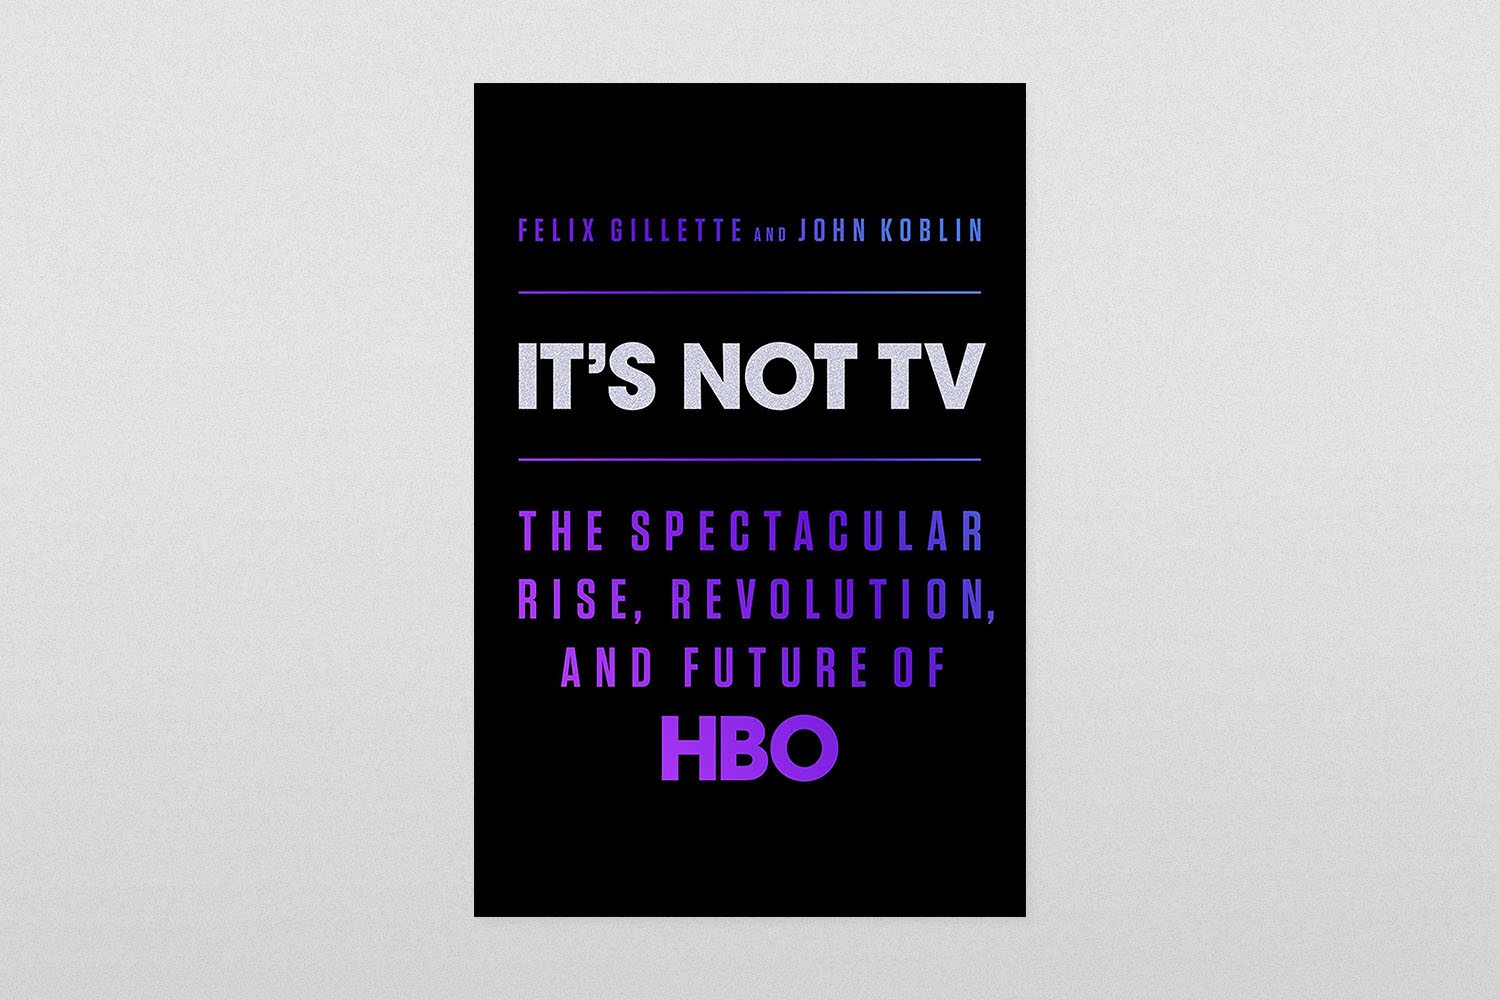 It's Not TV- The Spectacular Rise, Revolution, and Future of HBO